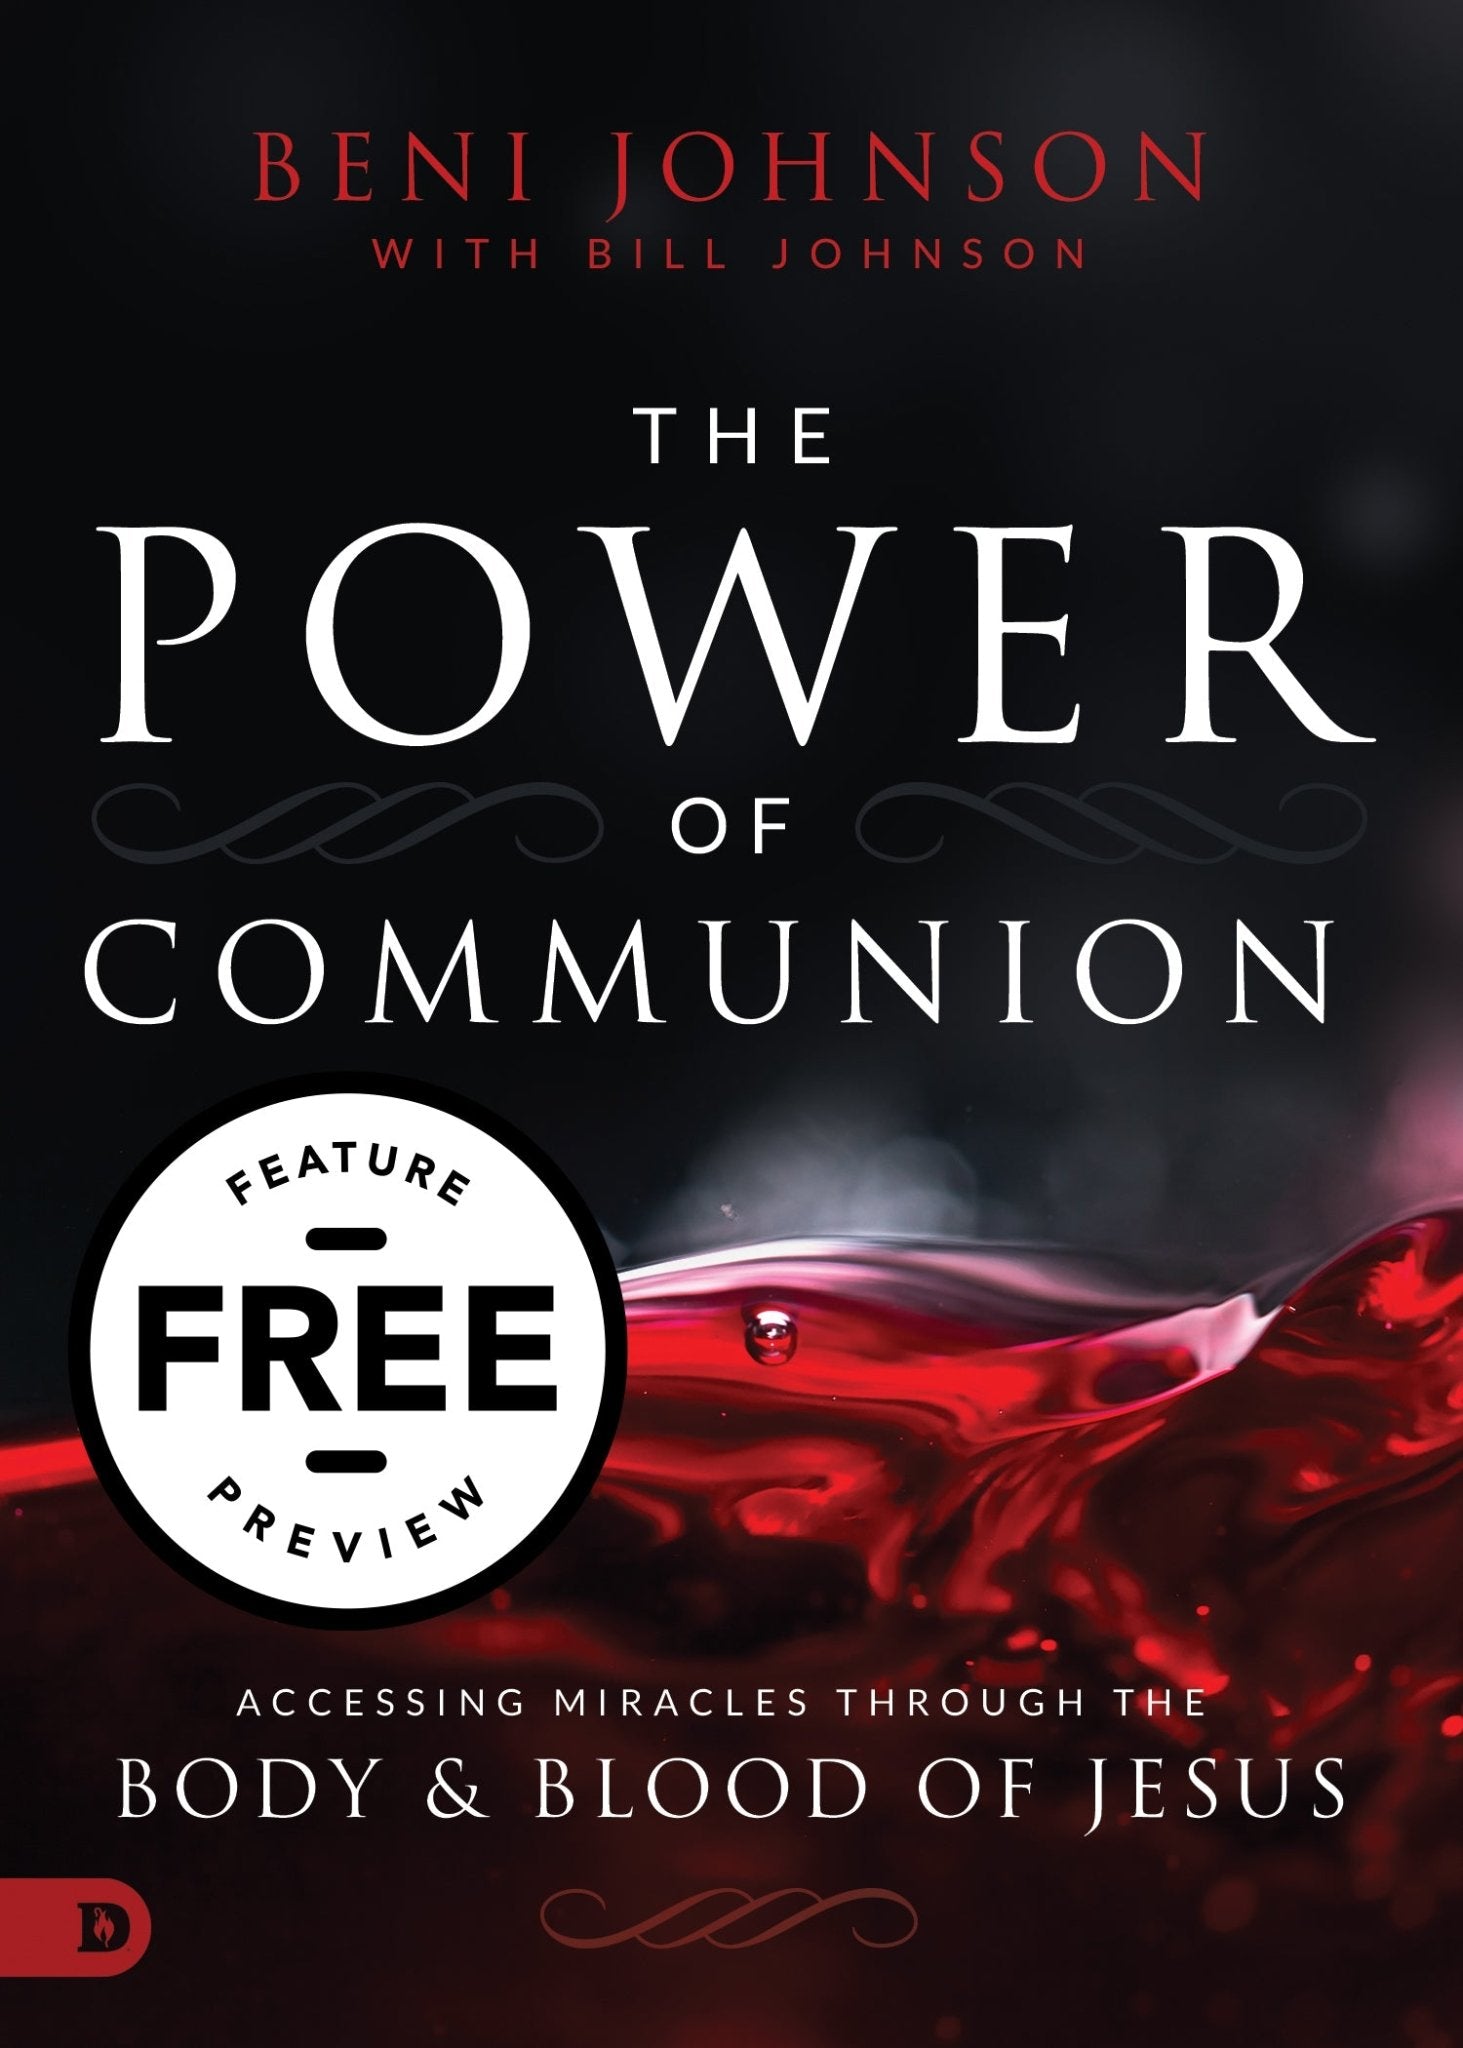 The Power of Communion Free Feature Message (PDF Download)